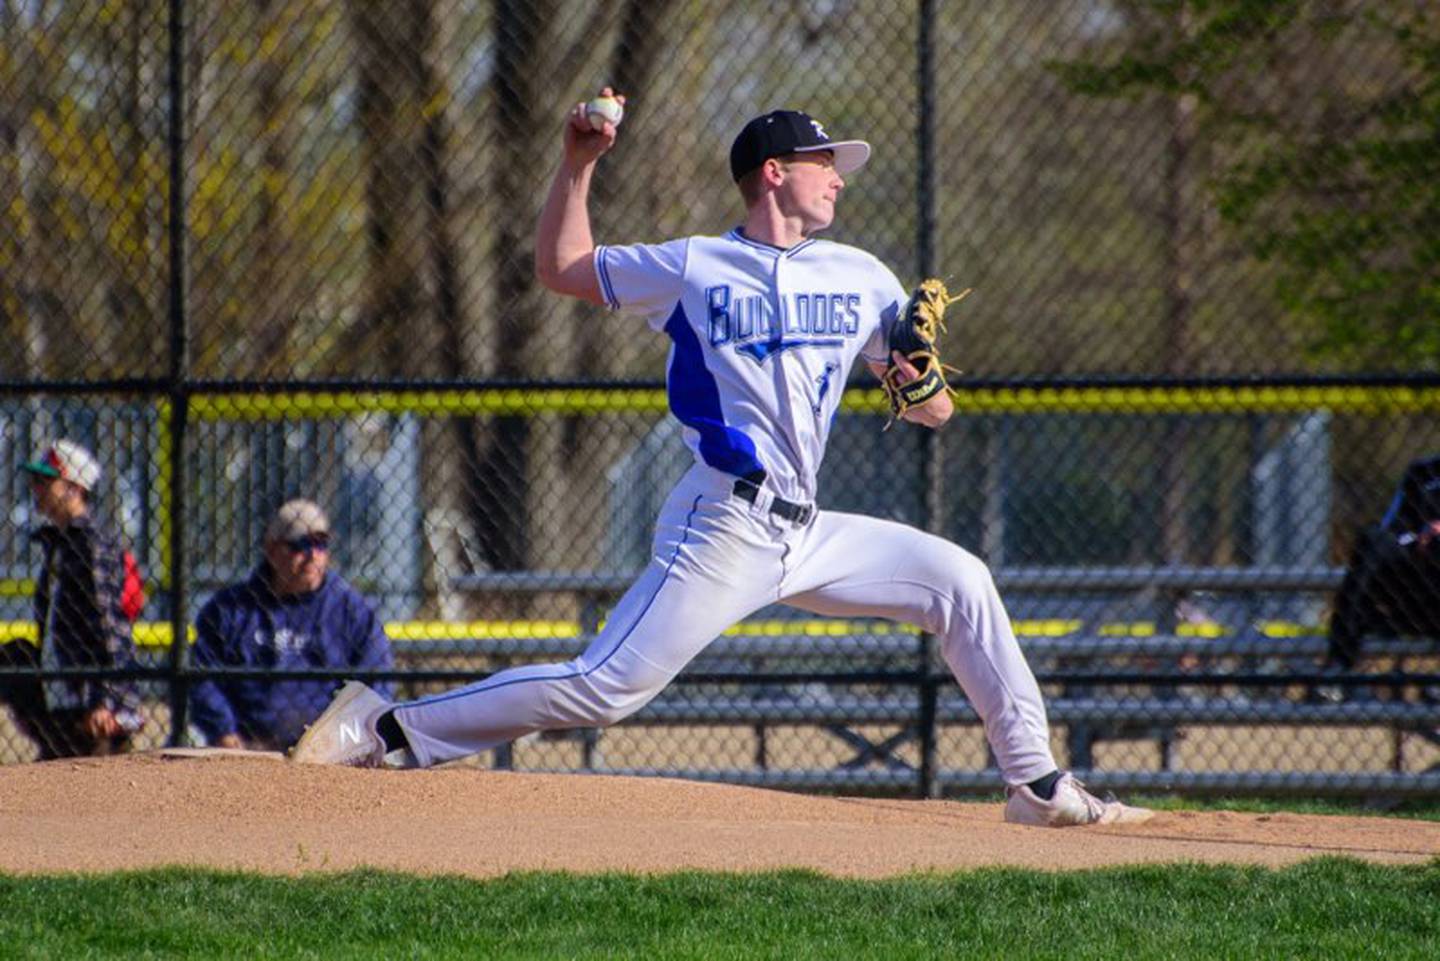 Riverside-Brookfield's Owen Murphy, the two-time Suburban Life baseball Player of the Year, was drafted by the Atlanta Braves with the 20th overall pick in the Major League Baseball draft.